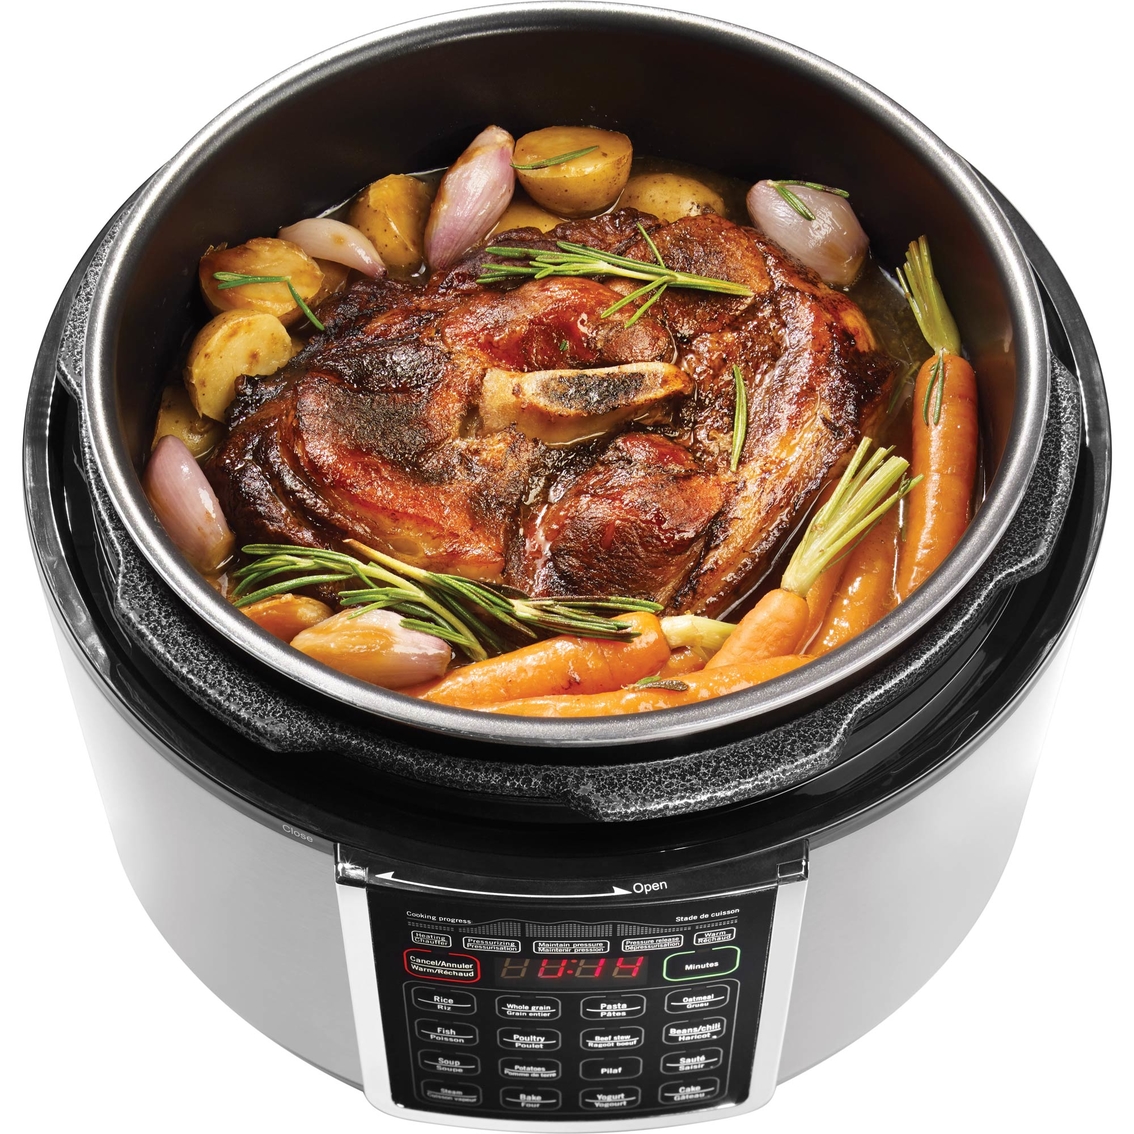 Starfrit Electric Pressure Cooker - Image 5 of 10